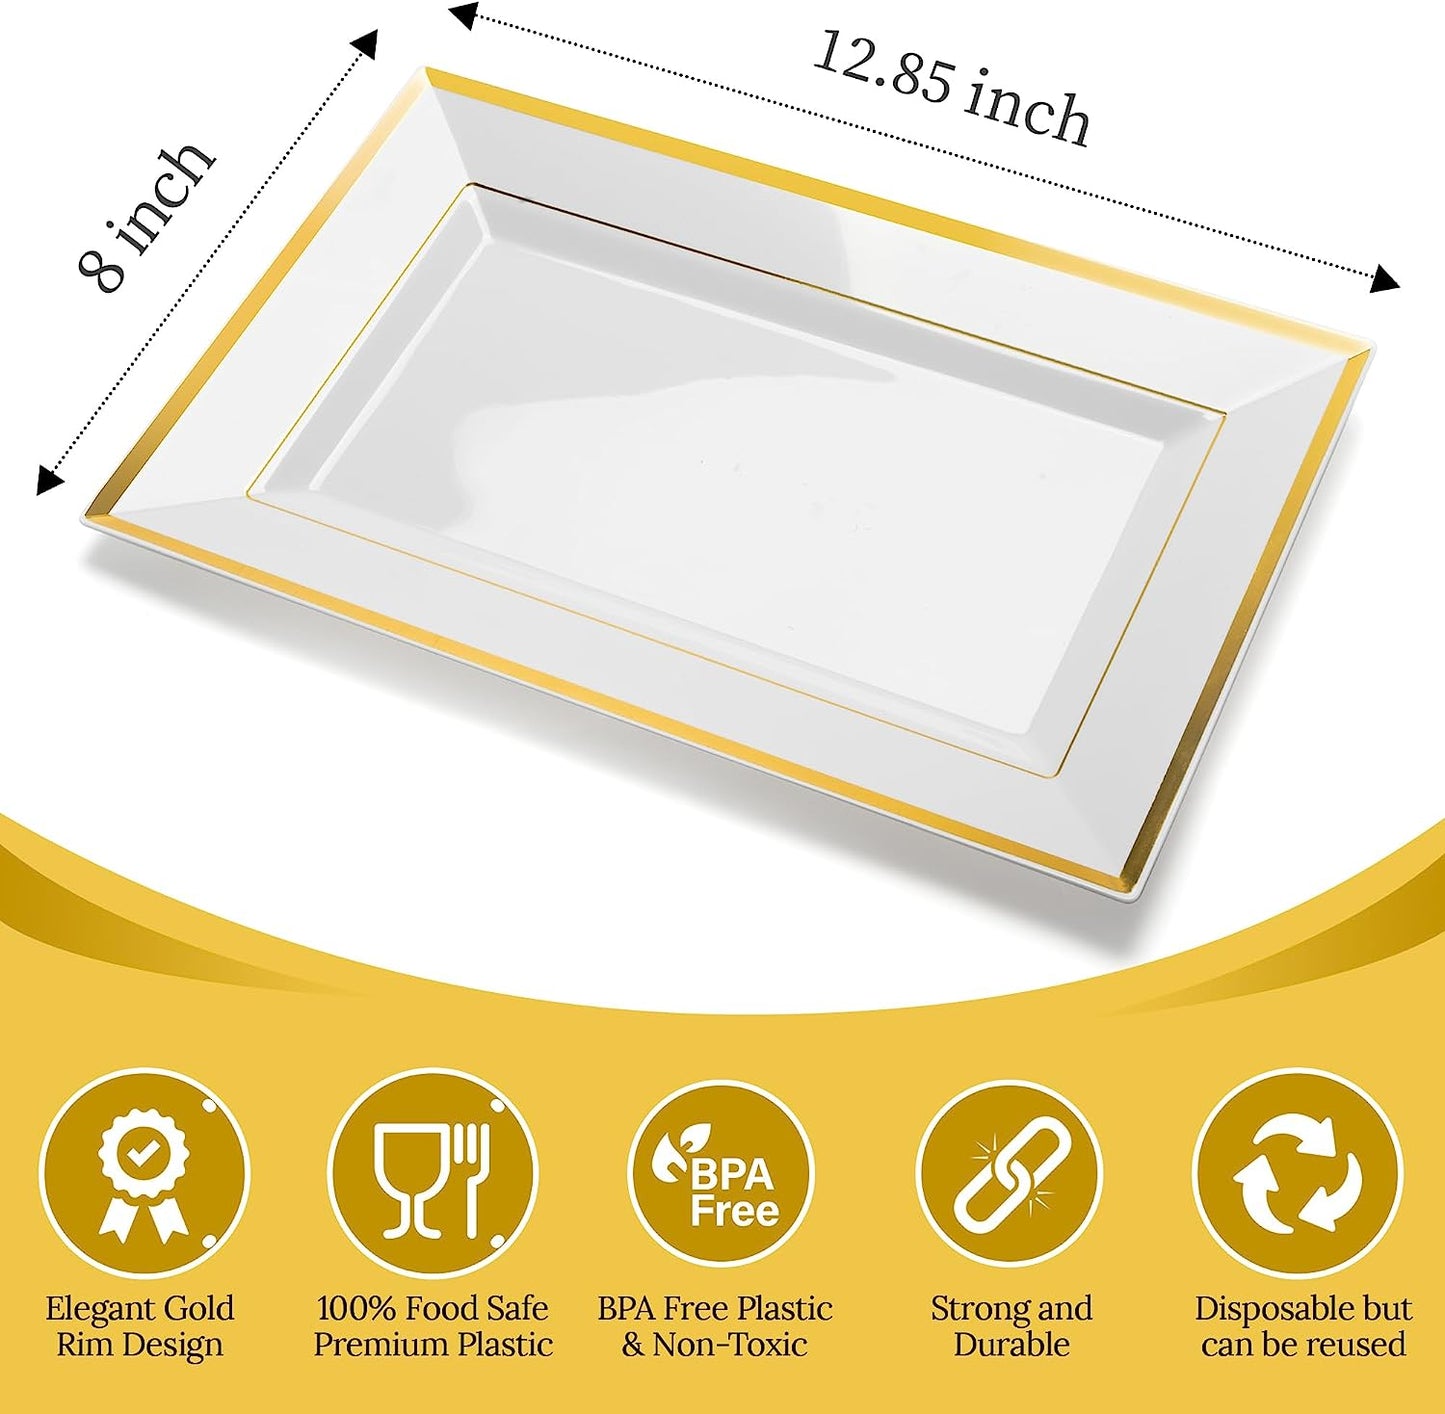 - Elegant Plastic Serving Tray & Platter Set (6Pk) - White & Gold Rim Disposable Serving Trays & Platters for Food - Weddings, Upscale Parties, Dessert Table, Cupcakes - 8 X 12.85 Inches